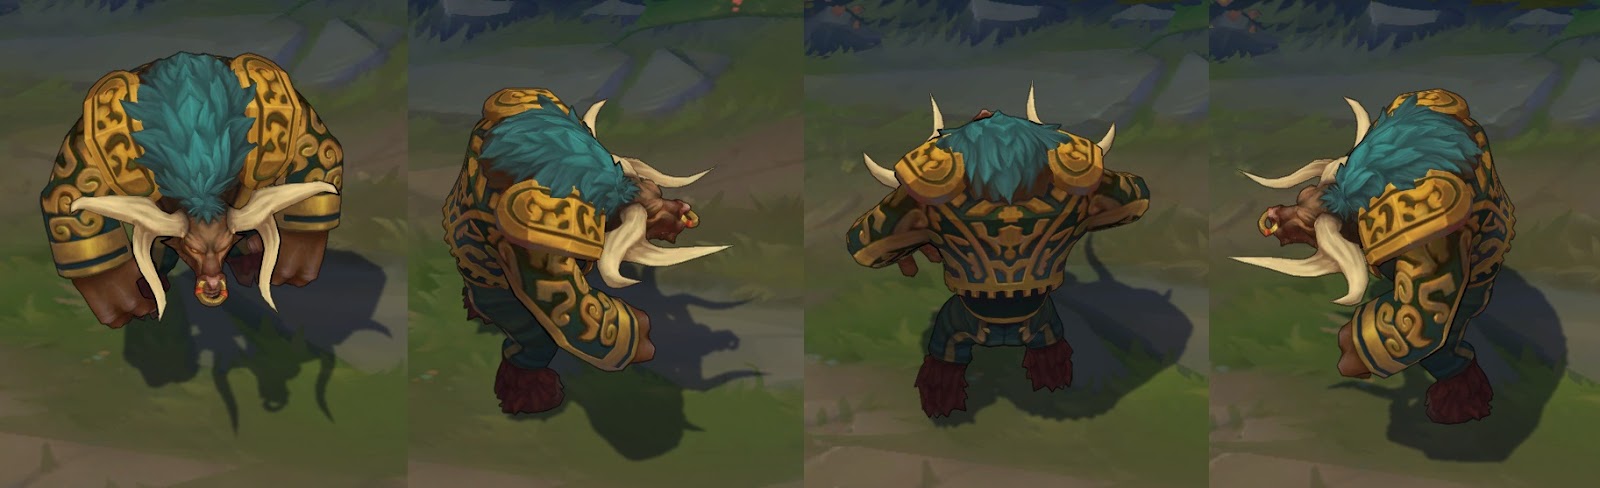 Matador Alistar skin for League of Legends ingame picture